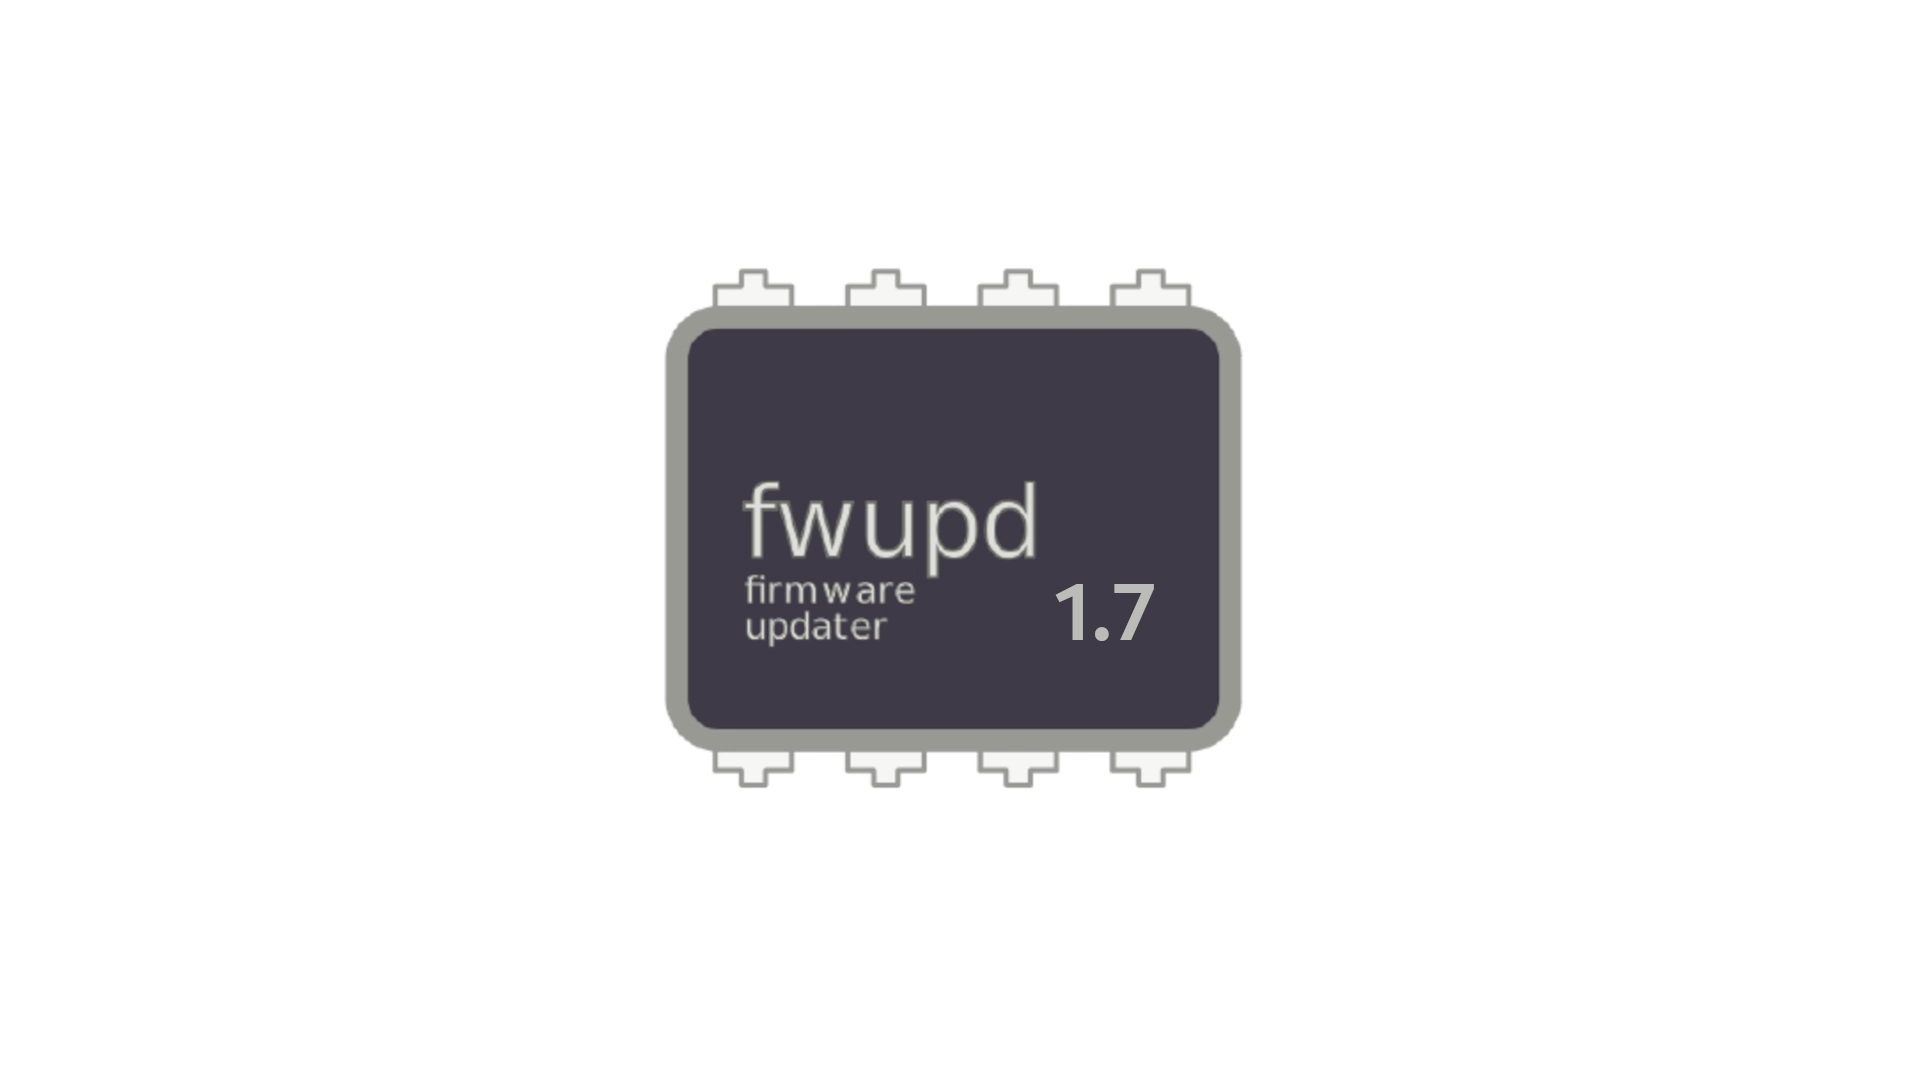 Fwupd 1.7 Adds Support for Logitech Devices with the Unified Battery Feature, More